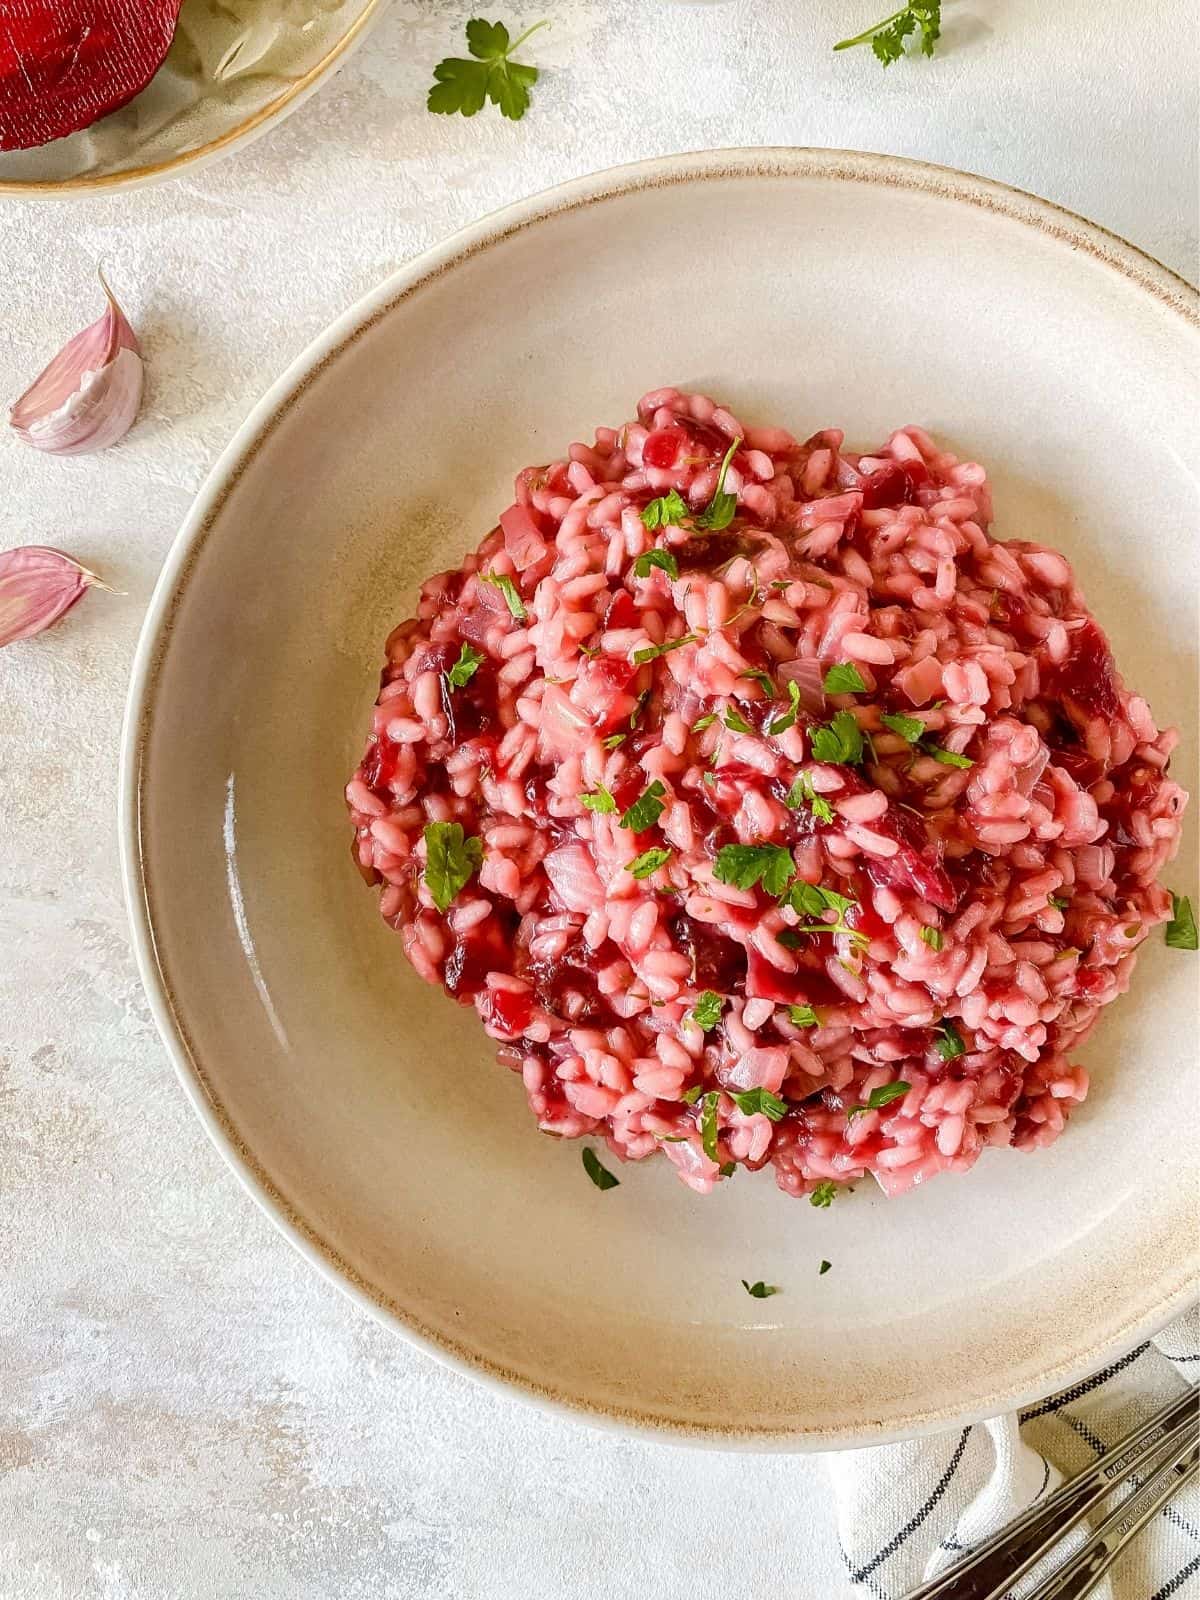 vegan beetroot risotto in a brown bowl.